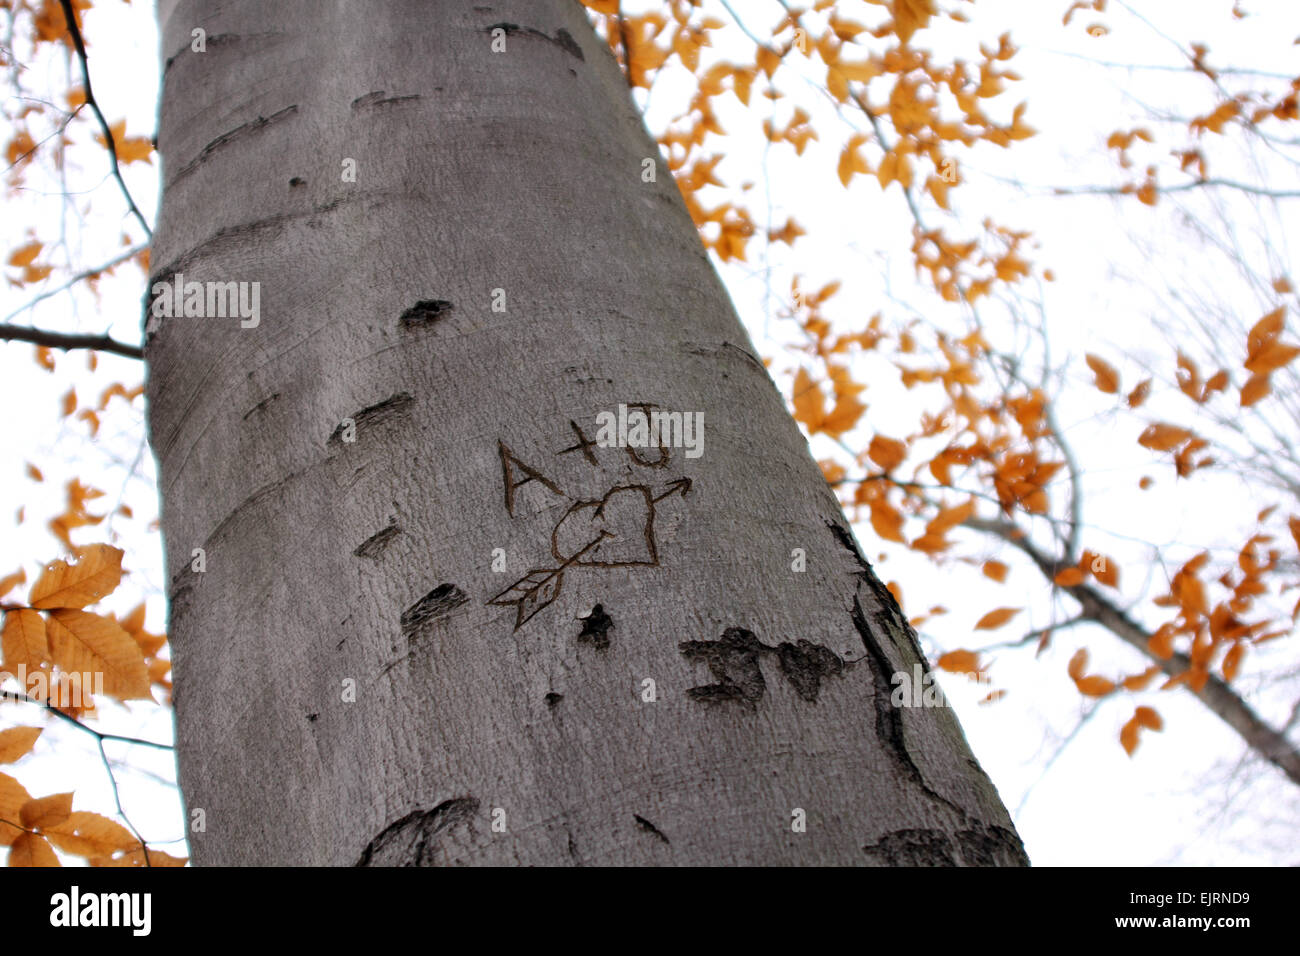 Initials are carved in a tree with a heart around them.  Autumn leaves are in the background. Stock Photo